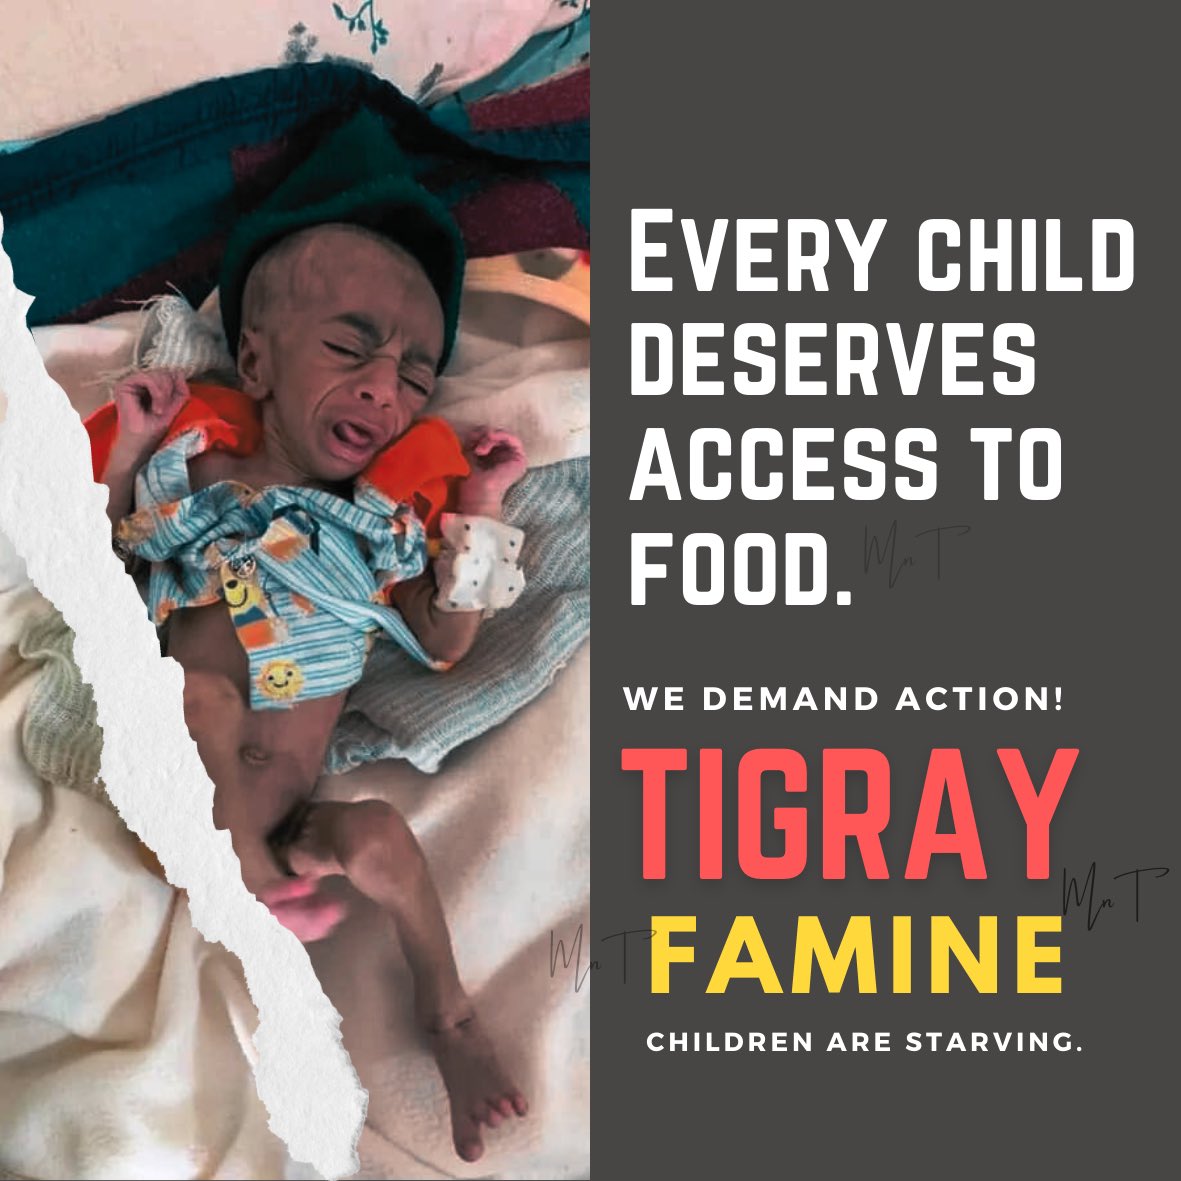 Every child deserves access to food, yet in #Tigray, many are dying of hunger. This is a crisis that demands global attention and action. #TigrayFamine
#Aid4Tigray #AUSummit @USAID @WFP @UNICEFEthiopia @eu_eeas @MikeHammerUSA @USEmbassyAddis